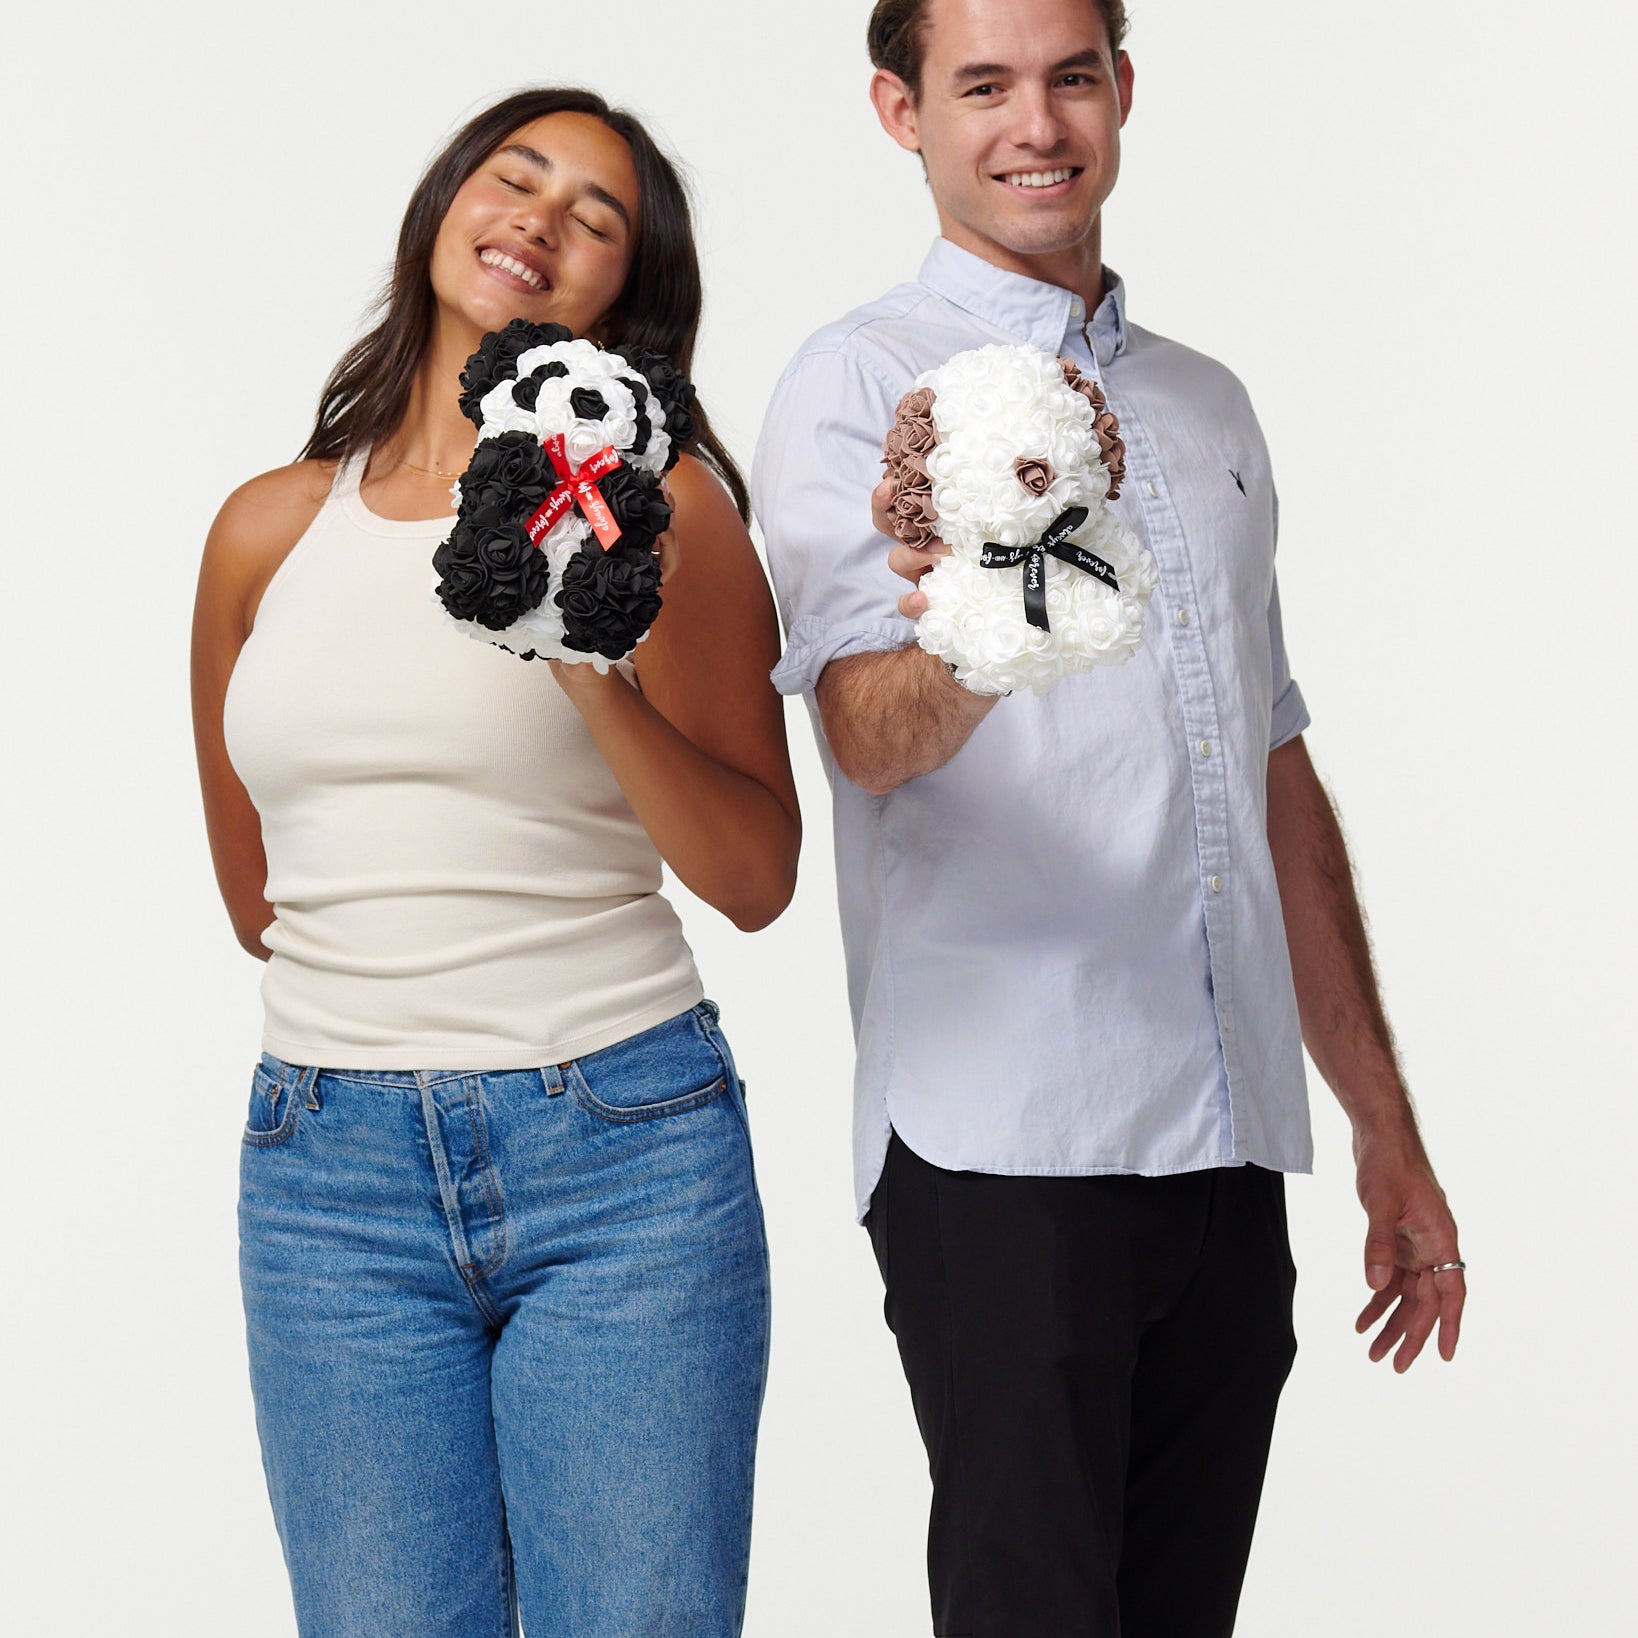 The image depicts a female model in a beige tank top and blue jeans, with her eyes closed and a content smile, holding a black and white flower panda with a red ribbon. Beside her, a male model in a light blue shirt and black pants smiles at the camera, holding a white flower bear with a black ribbon. Both models are presenting the artificial flower animals as treasured items, suggesting a joyful and affectionate context